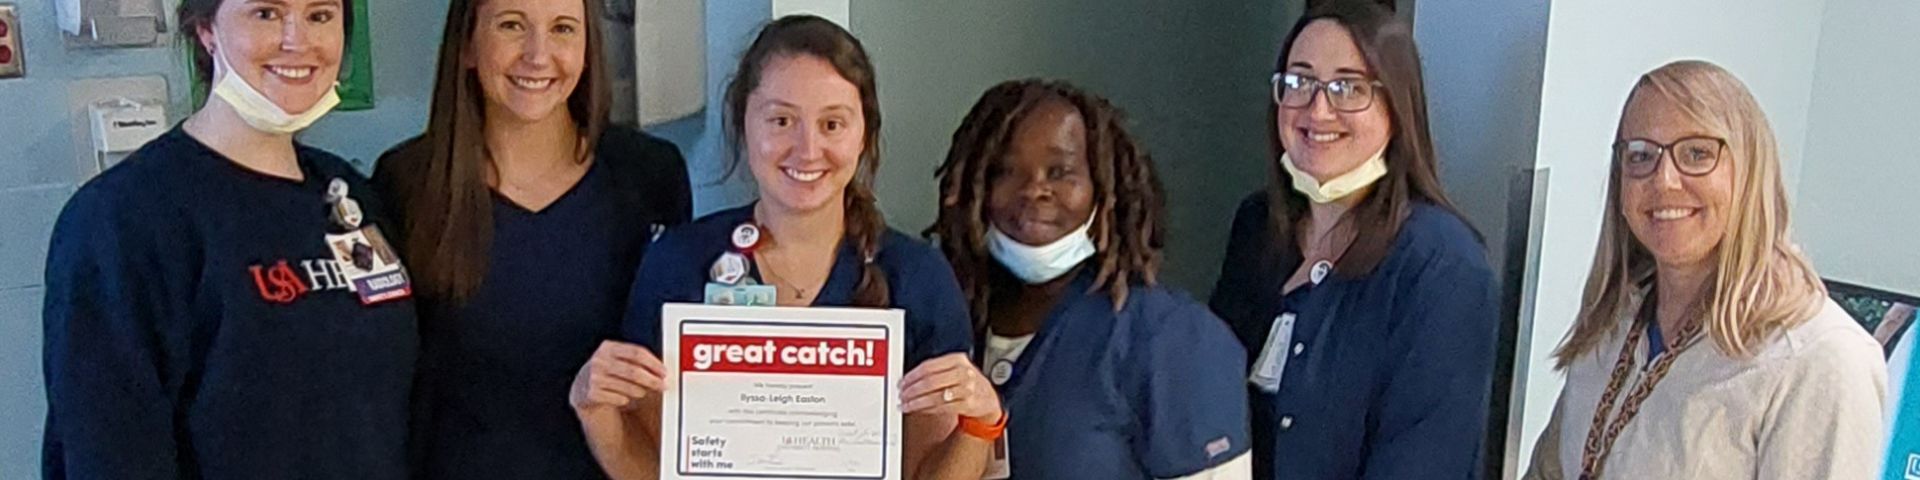 Two employees win Great Catch awards